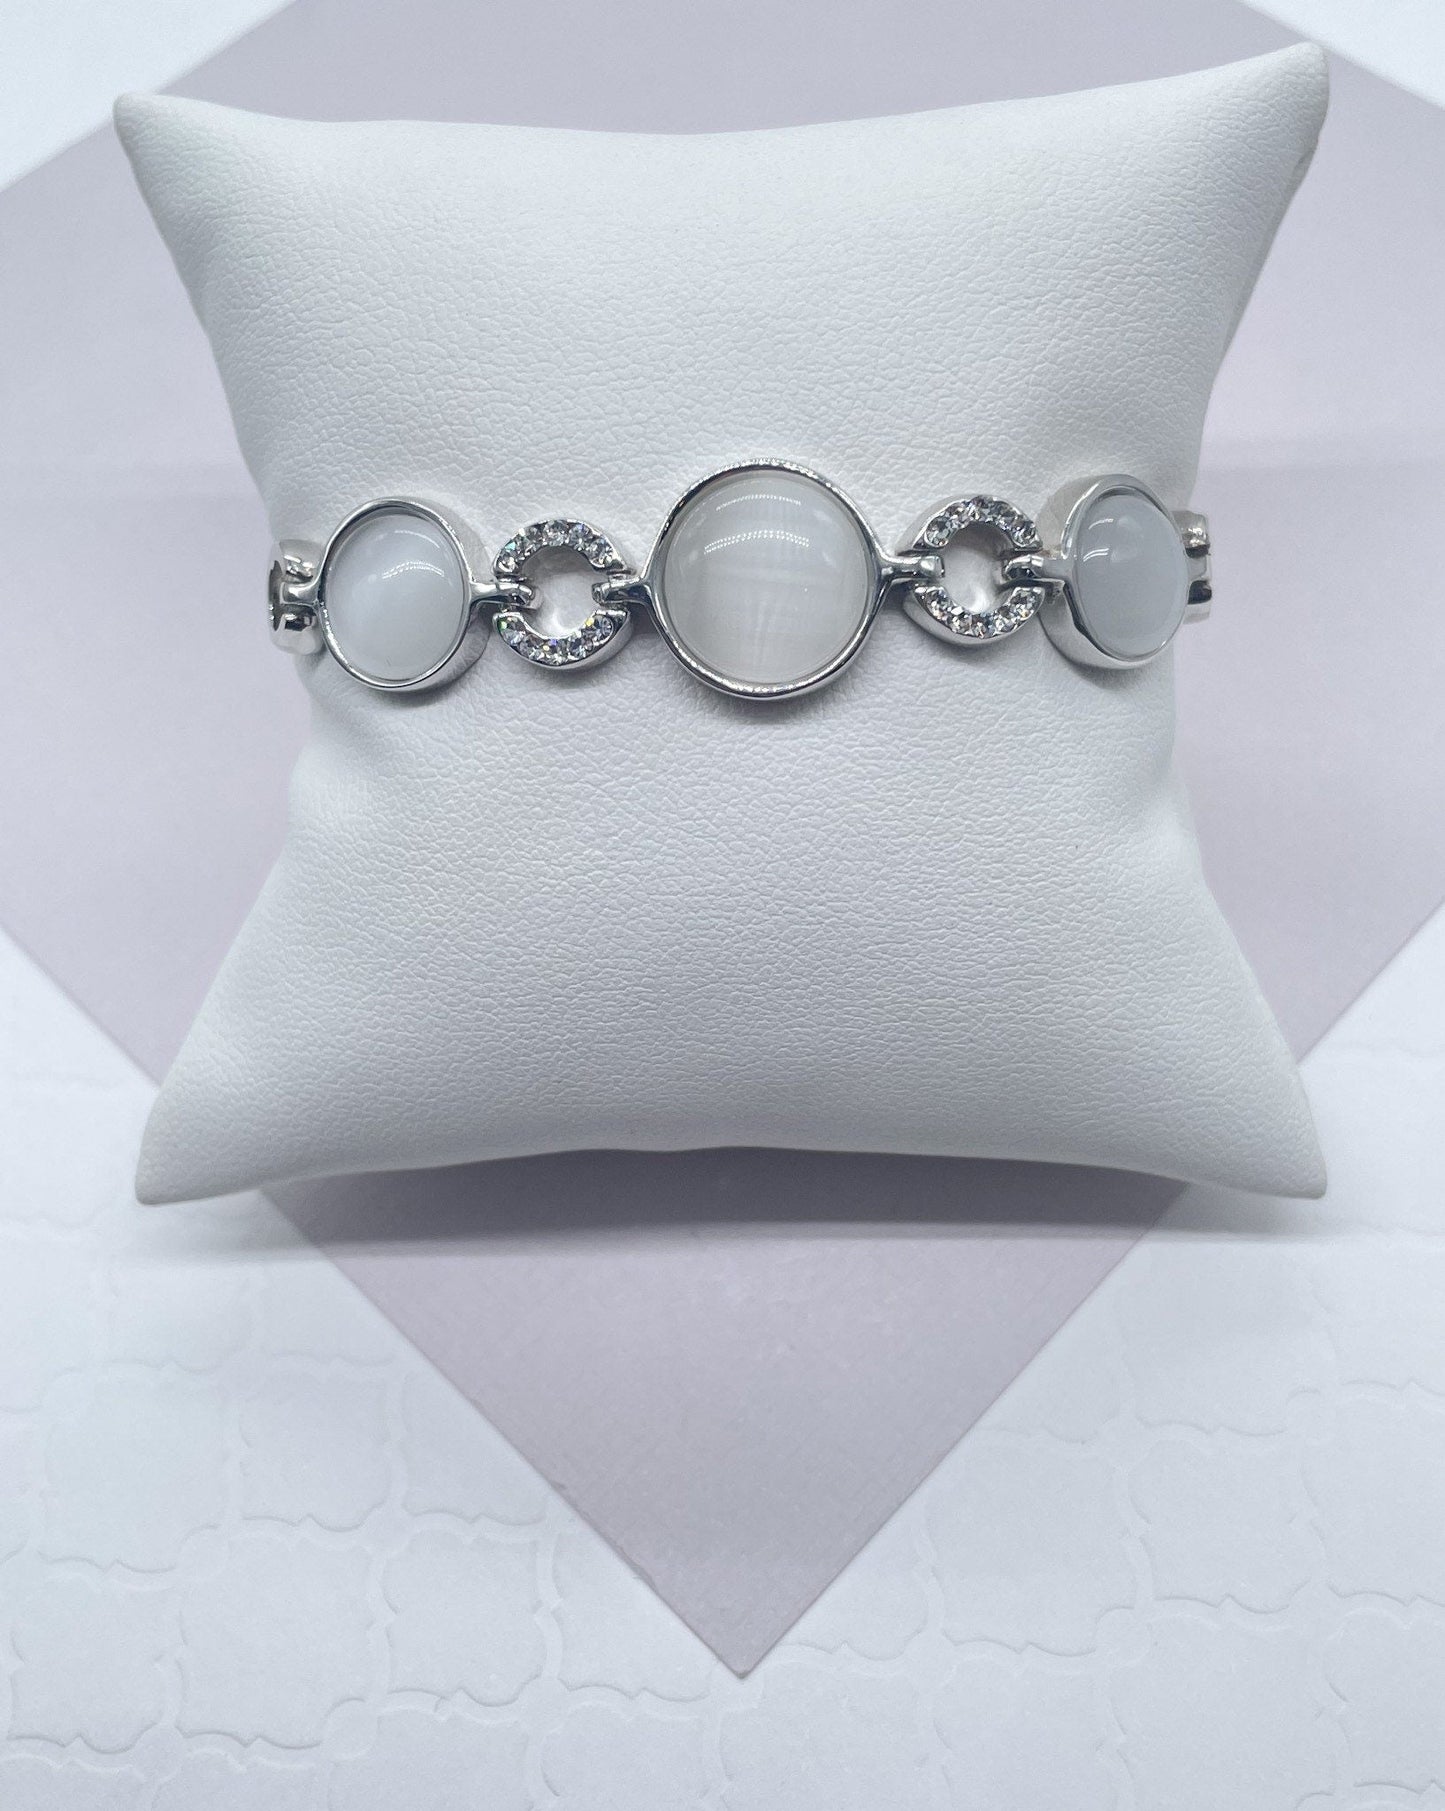 Silver Layered Cuff Bracelet with Milky White Colored Stones and Zirconia Setting